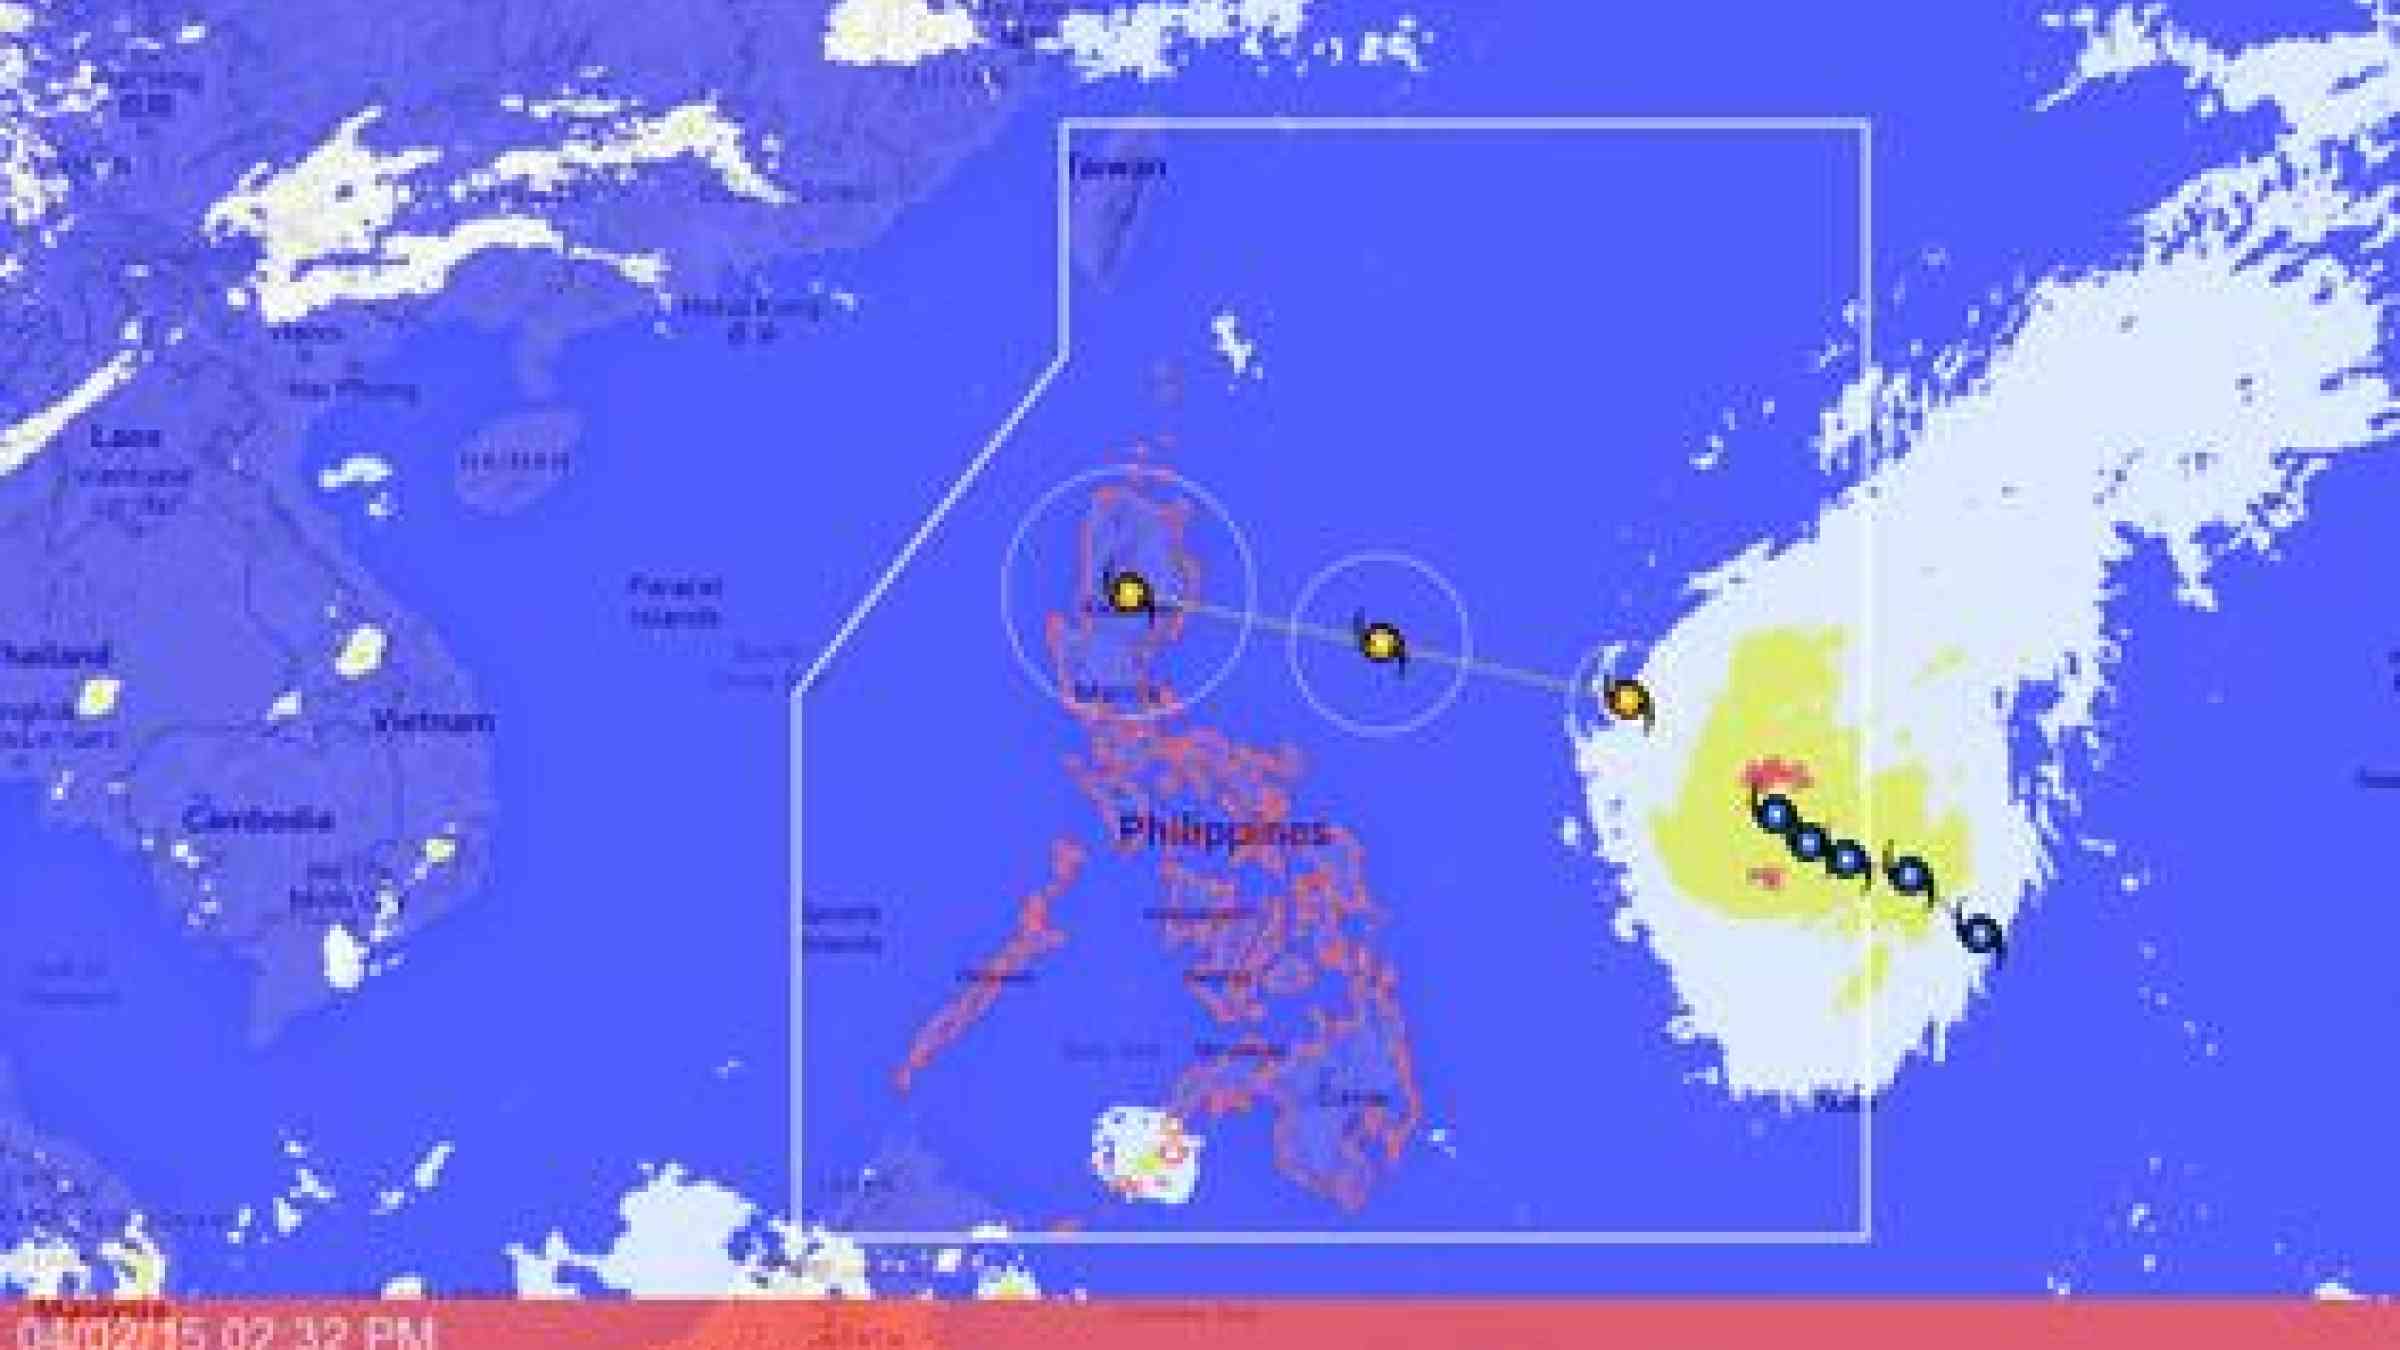 Live monitoring of Typhoon Maysak's track from the Philippines' DOST-Project NOAH website.